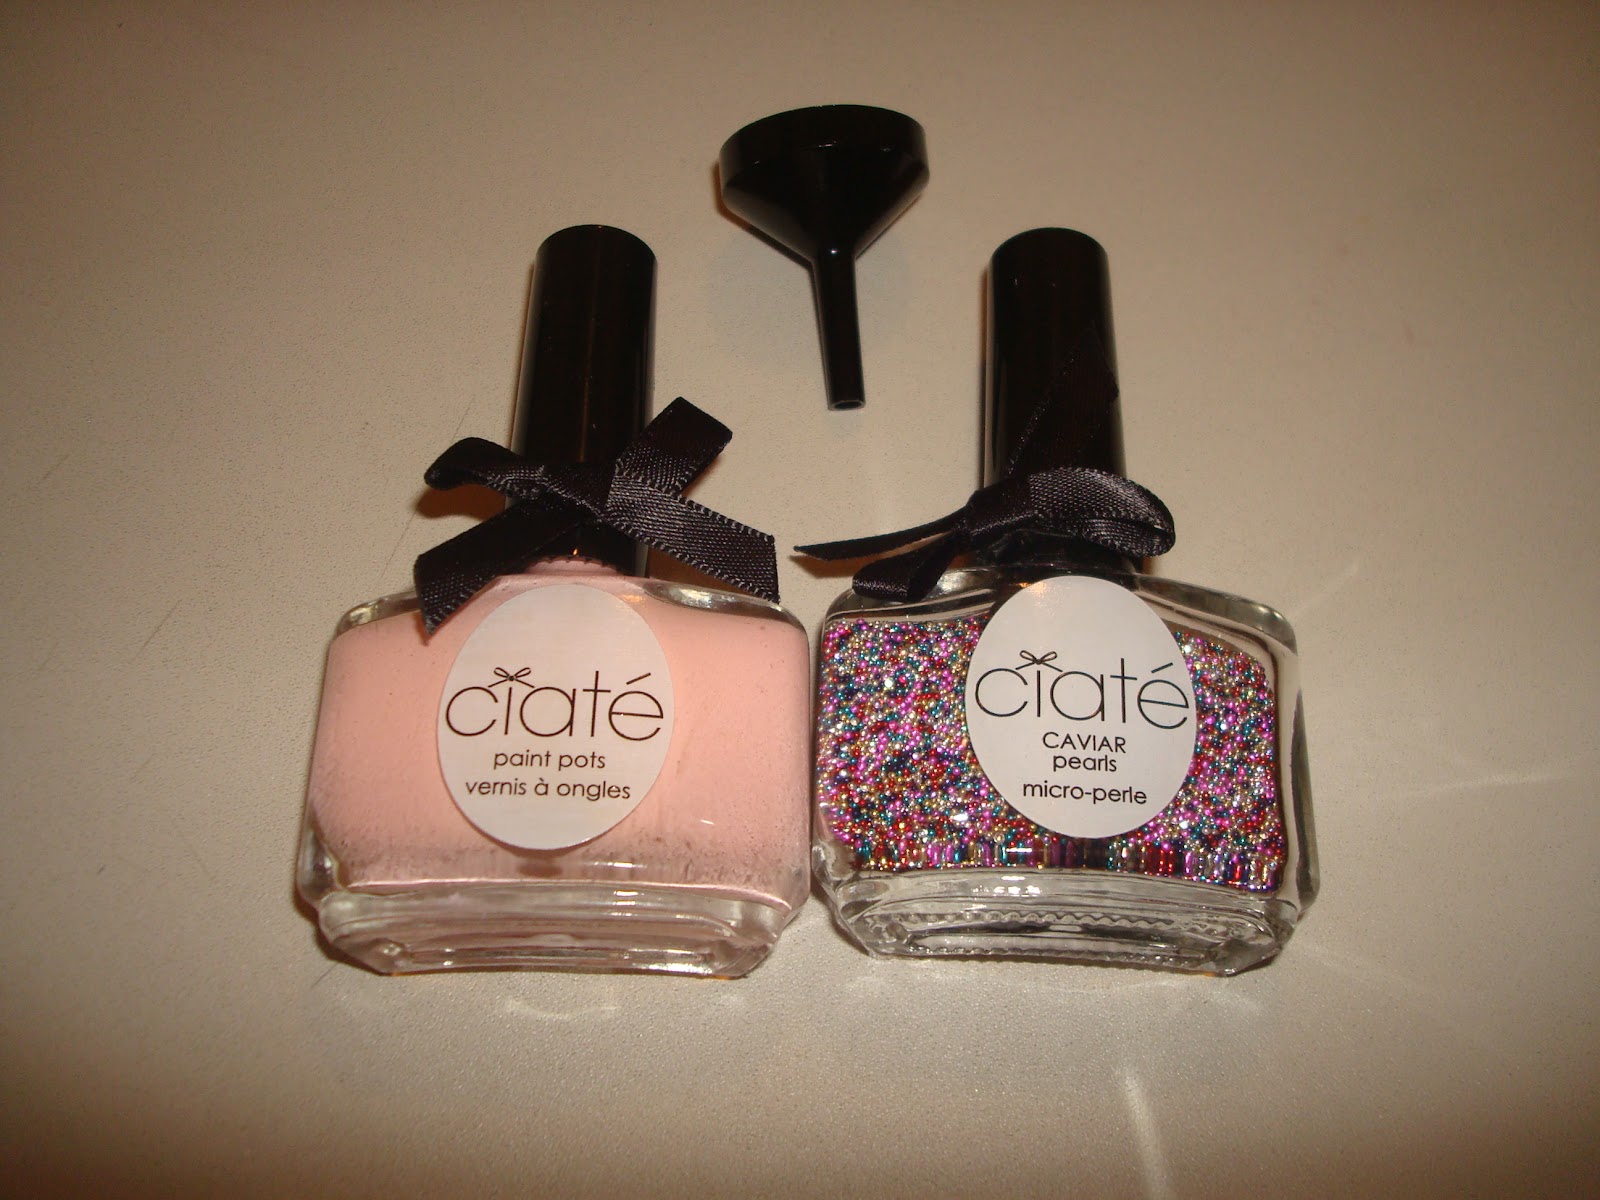 Ciate Nails Caviar Manicure Review & Swatches